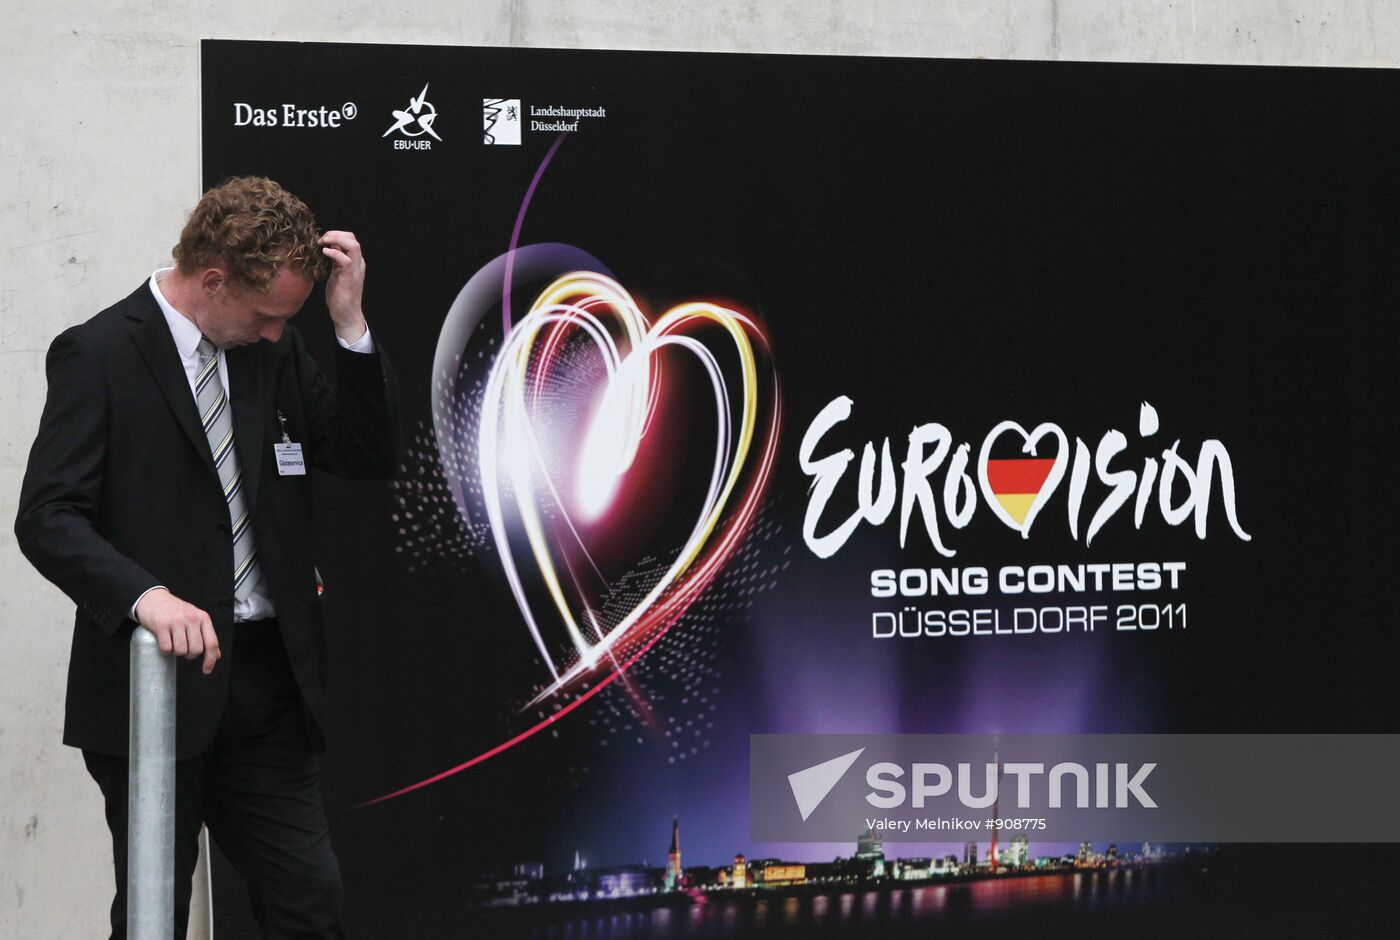 Advertisement for Eurovision Song Contest 2011